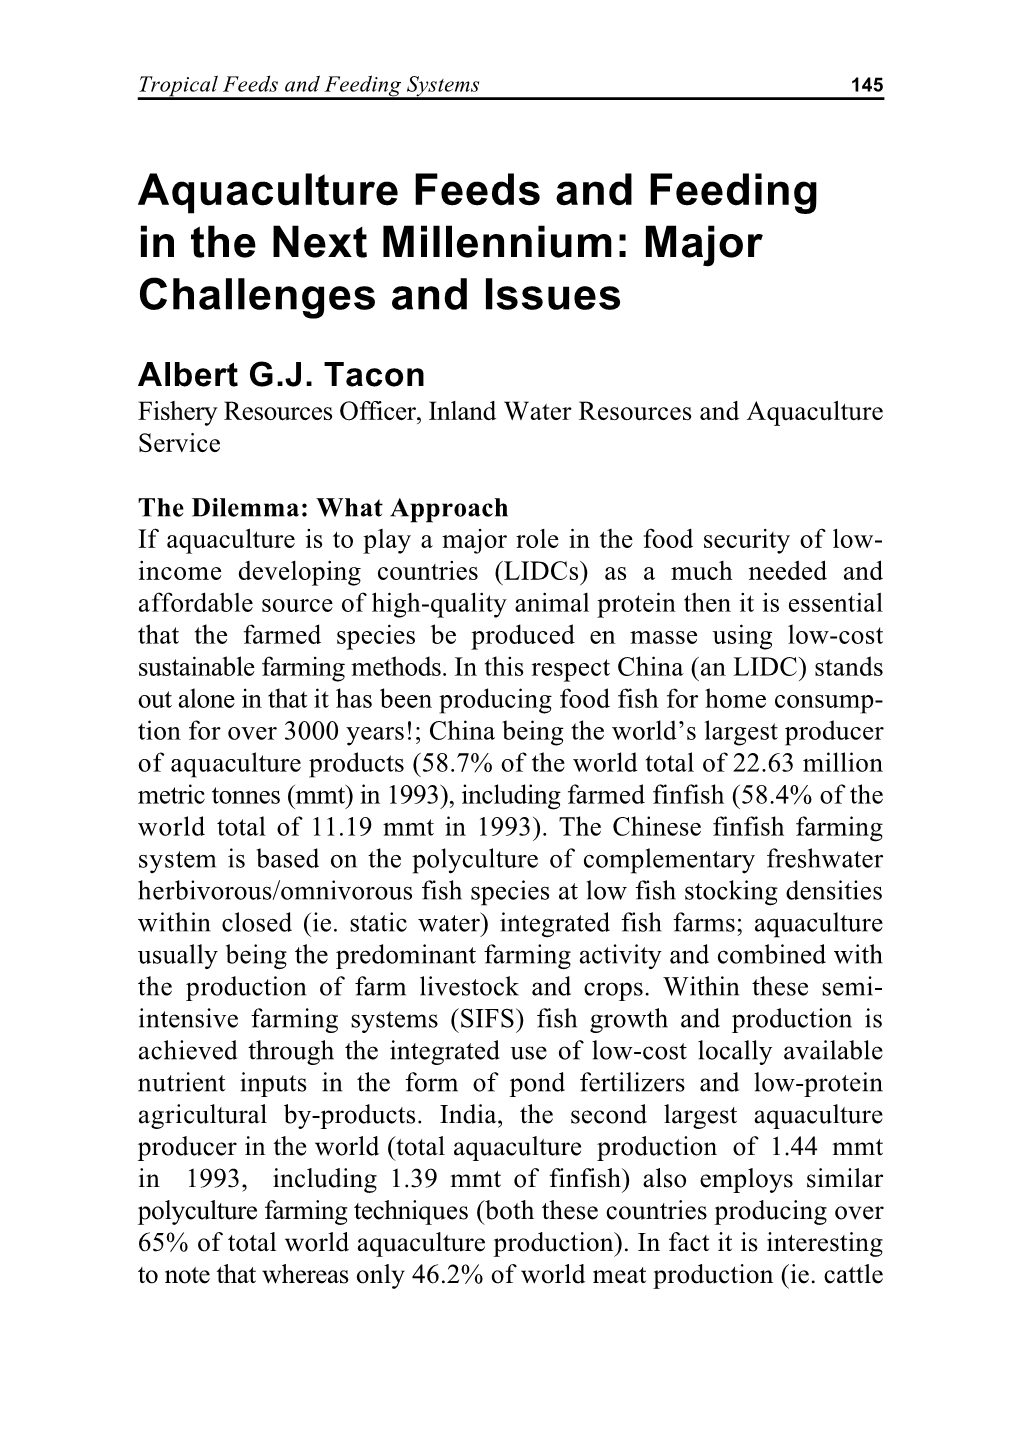 Aquaculture Feeds and Feeding in the Next Millennium: Major Challenges and Issues